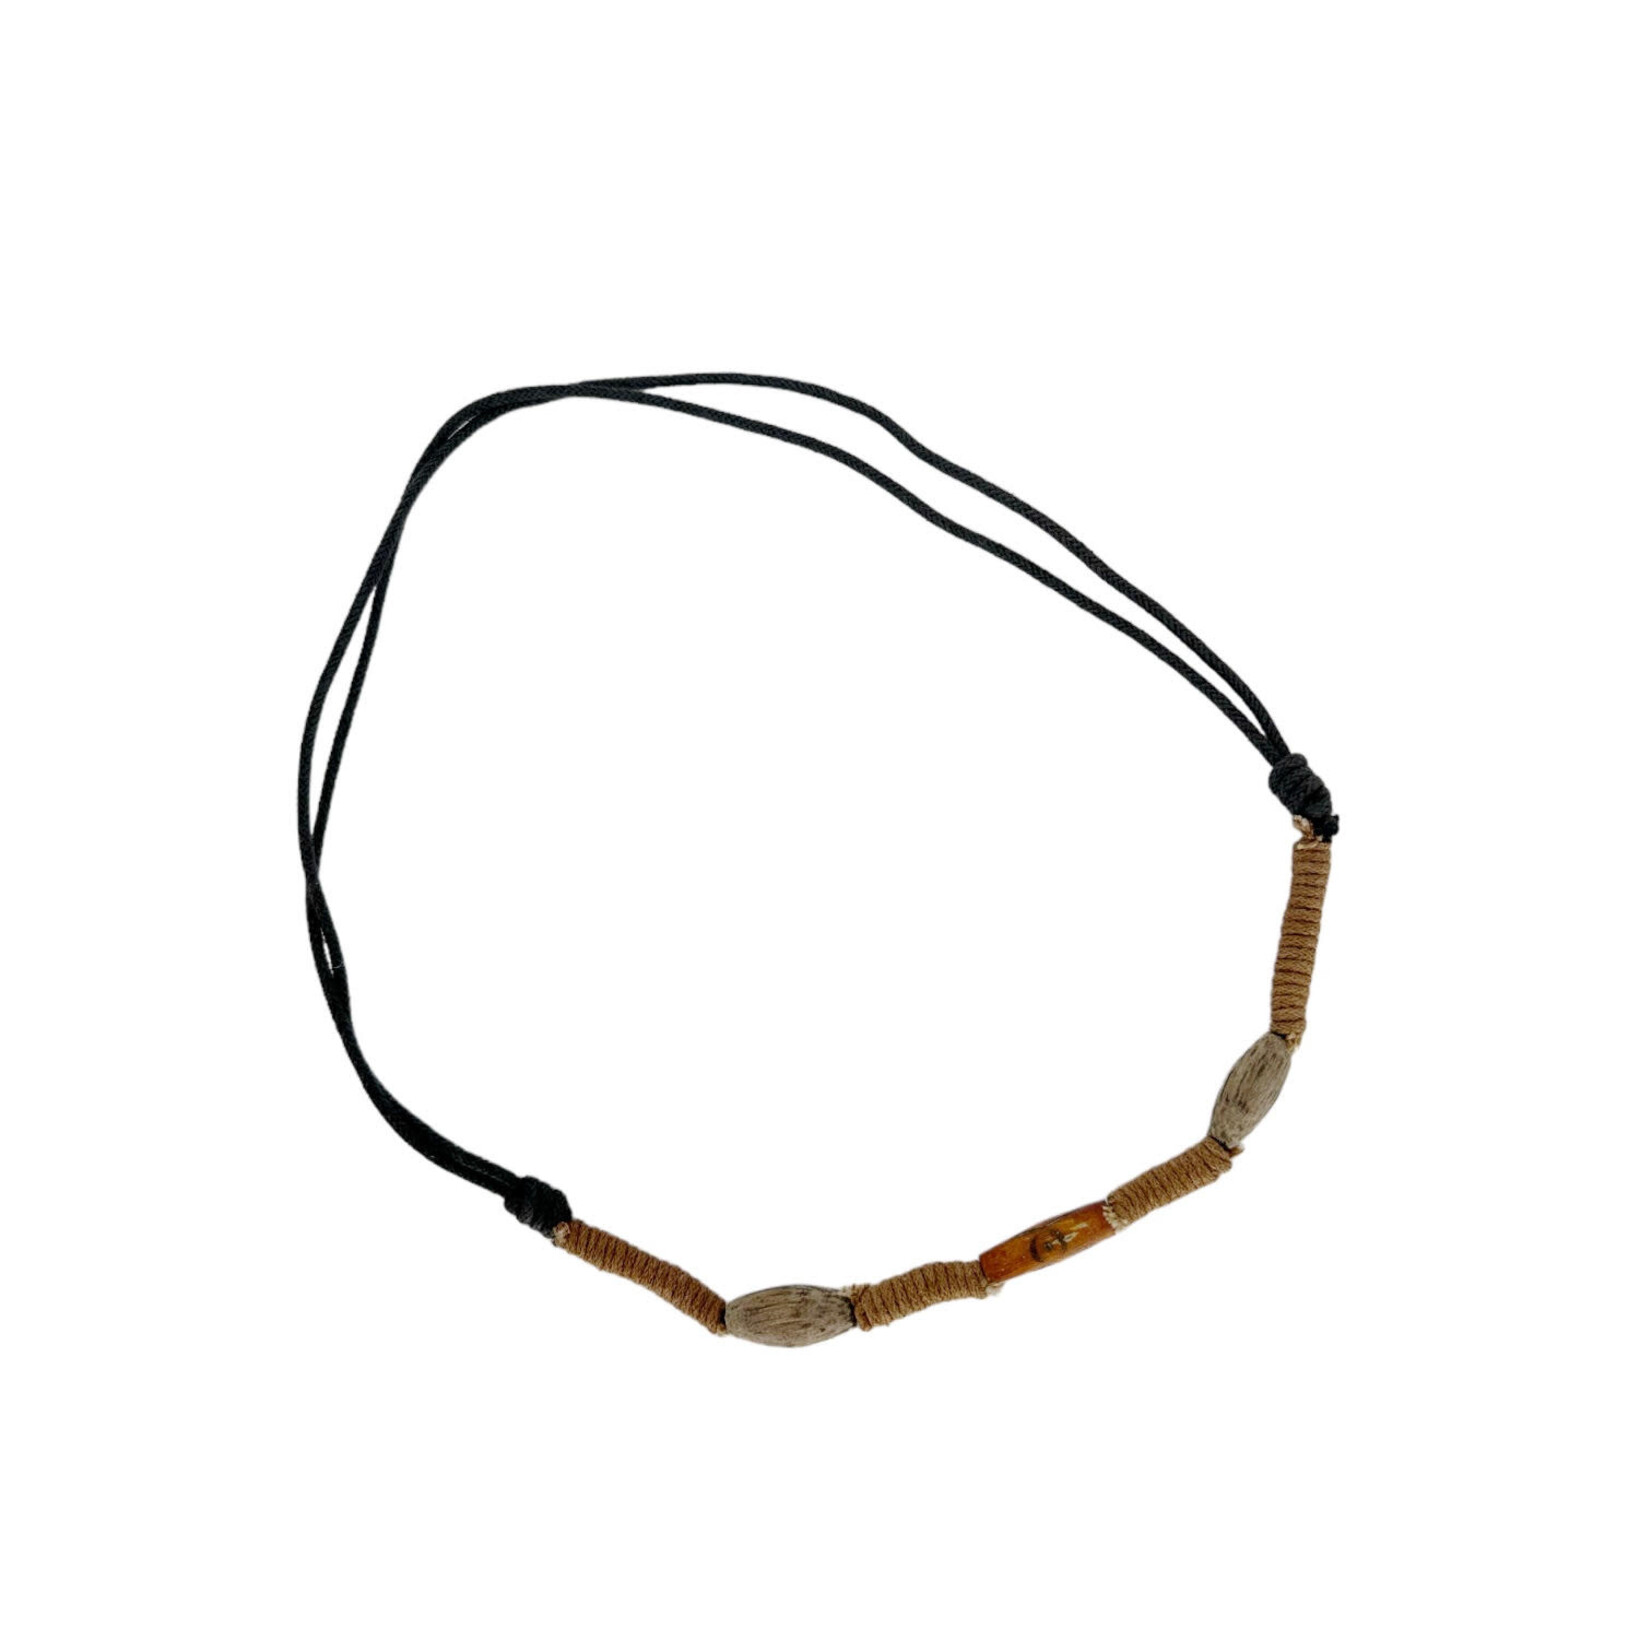 Wood and String Bead Adjustable Cord Necklace